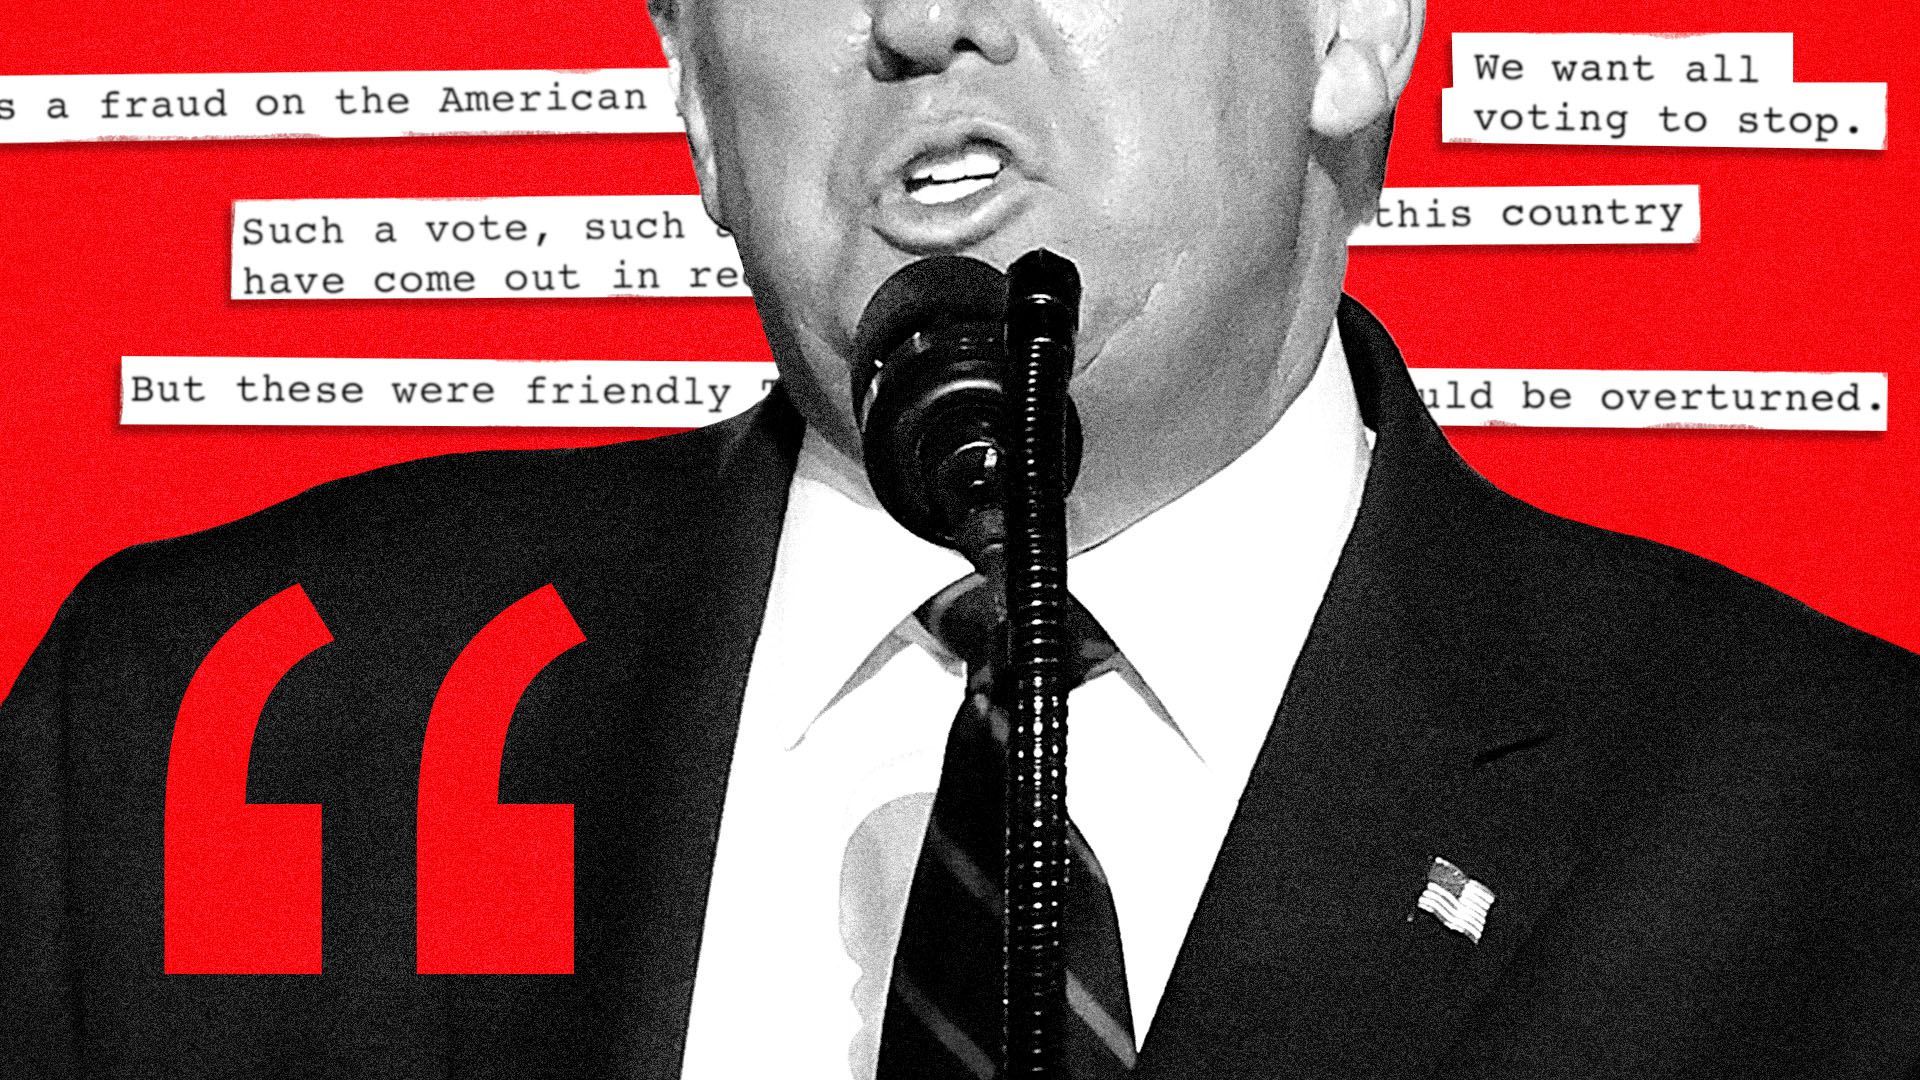 Photo illustration of Donald trump speaking with quotes from his election night speech in the background